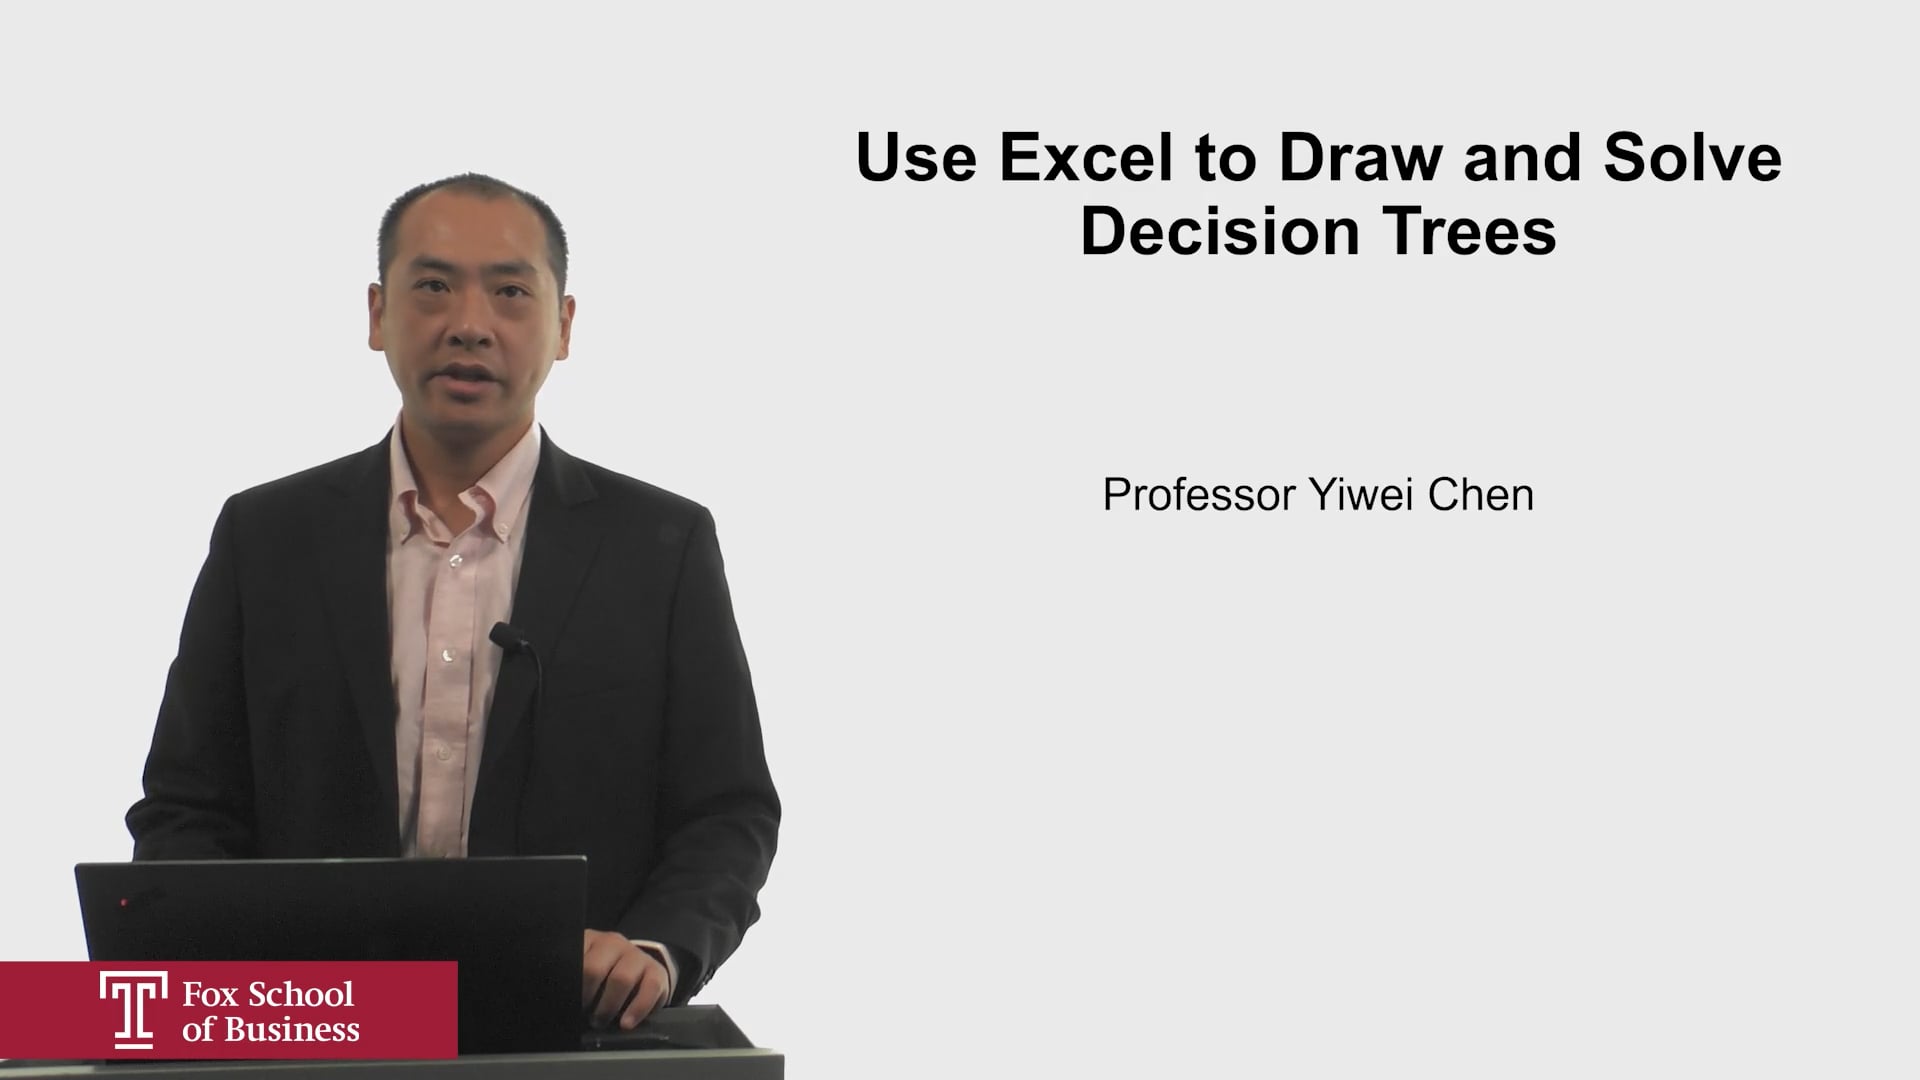 Use Excel to Draw and Solve Decision Trees